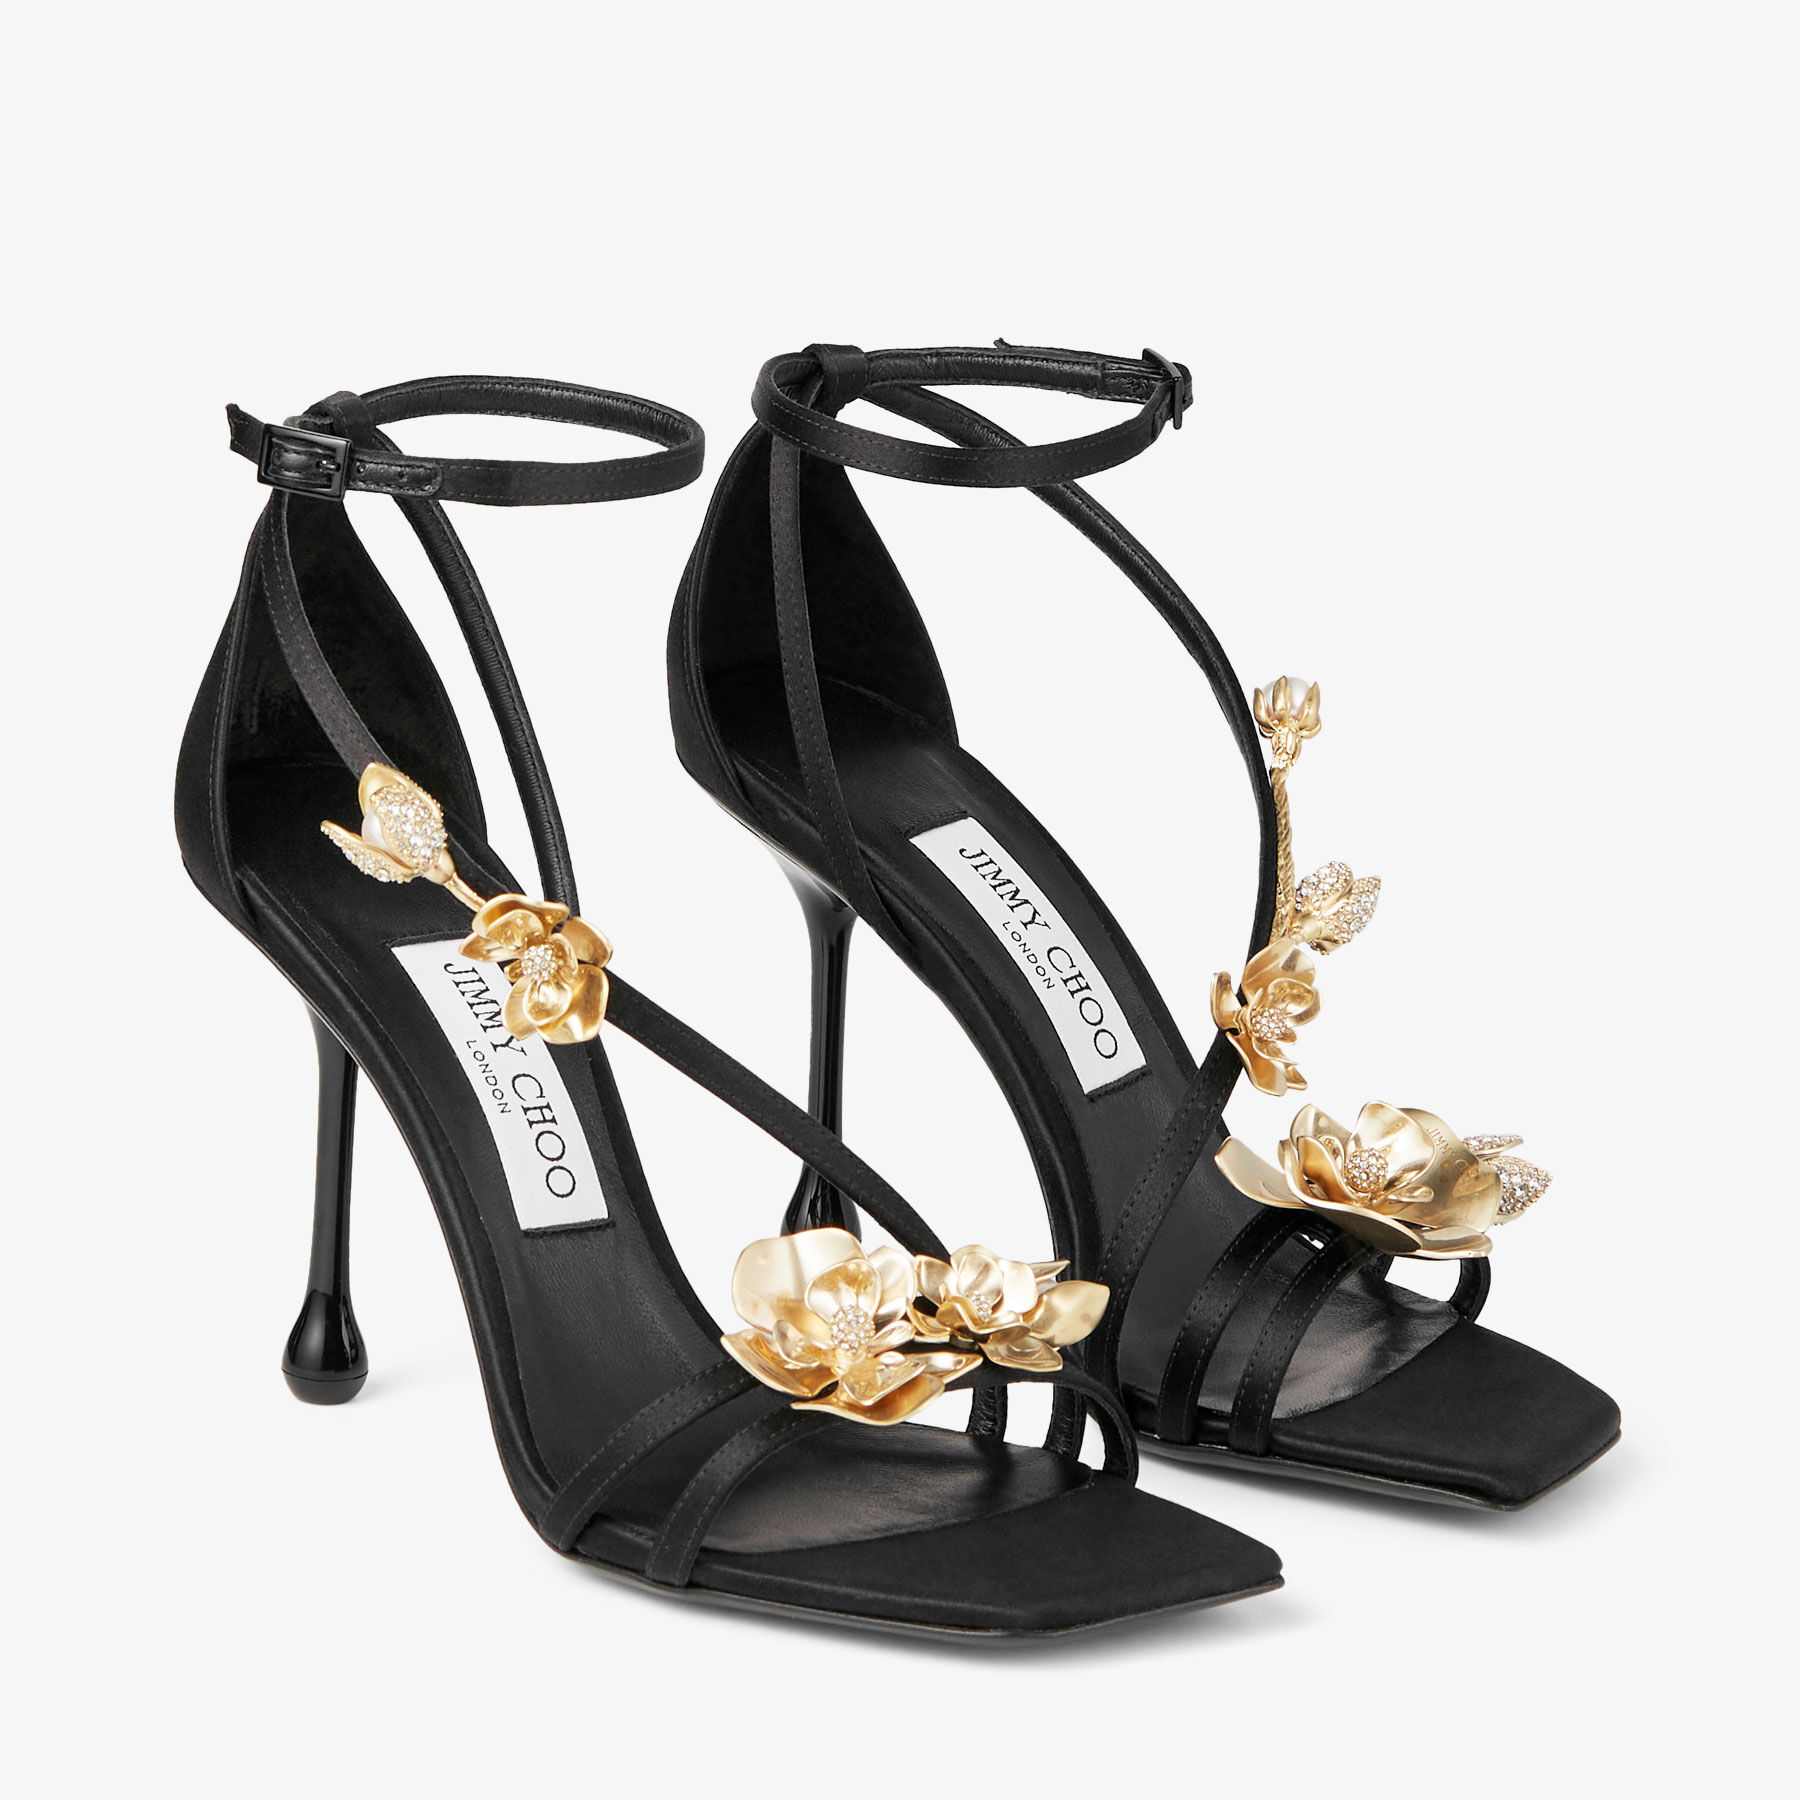 ZEA 95 | Black Satin Sandals with Metal Flowers | New Collection 